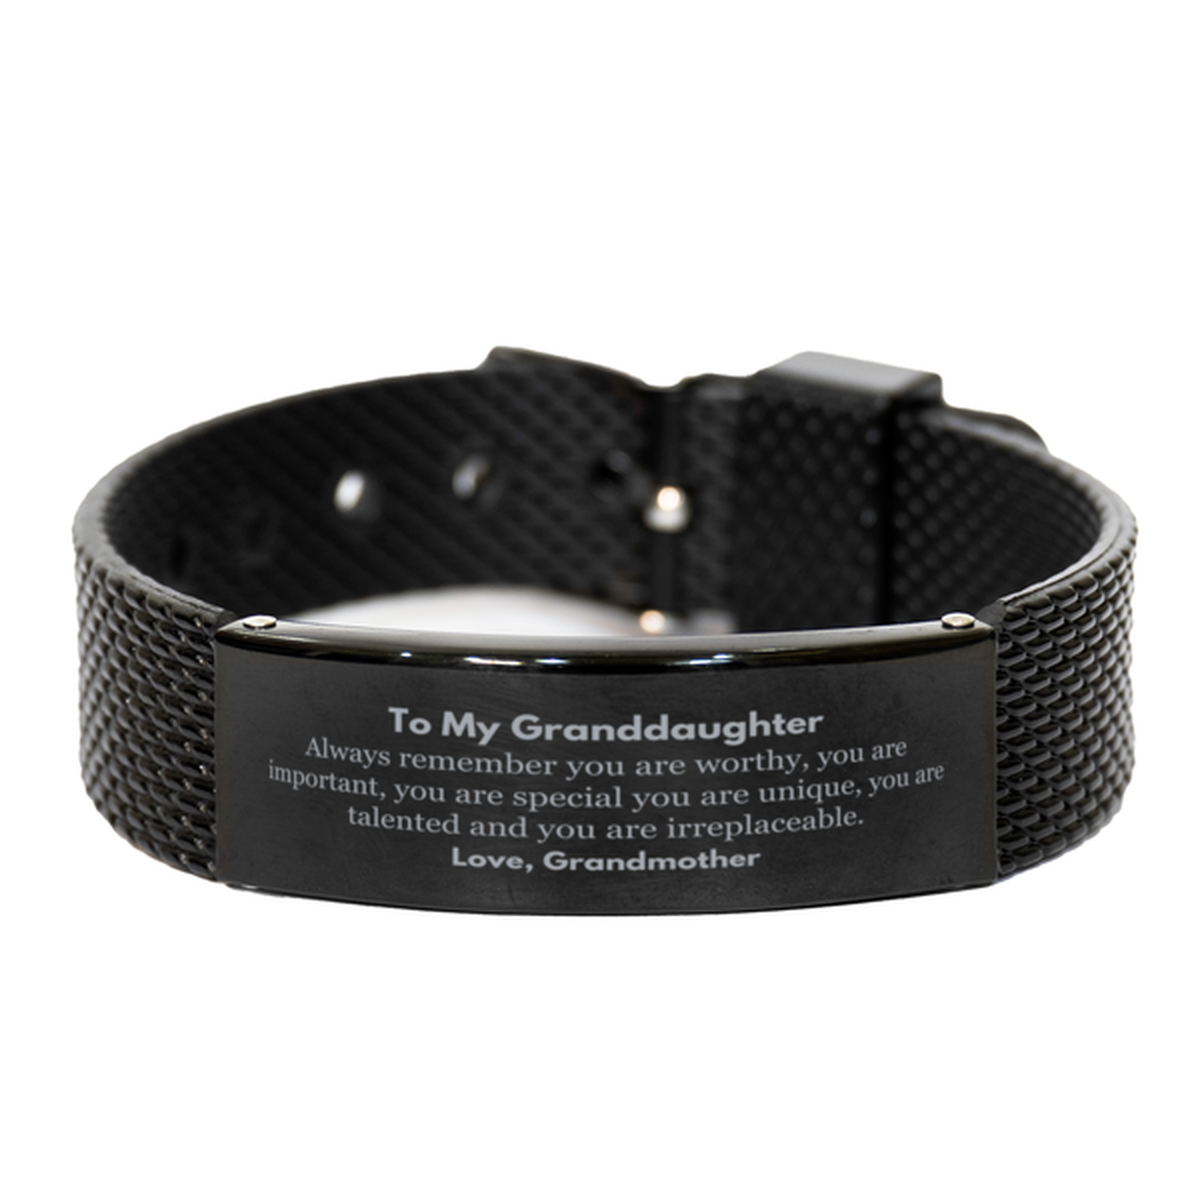 Granddaughter Birthday Gifts from Grandmother, Inspirational Black Shark Mesh Bracelet for Granddaughter Christmas Graduation Gifts for Granddaughter Always remember you are worthy, you are important. Love, Grandmother